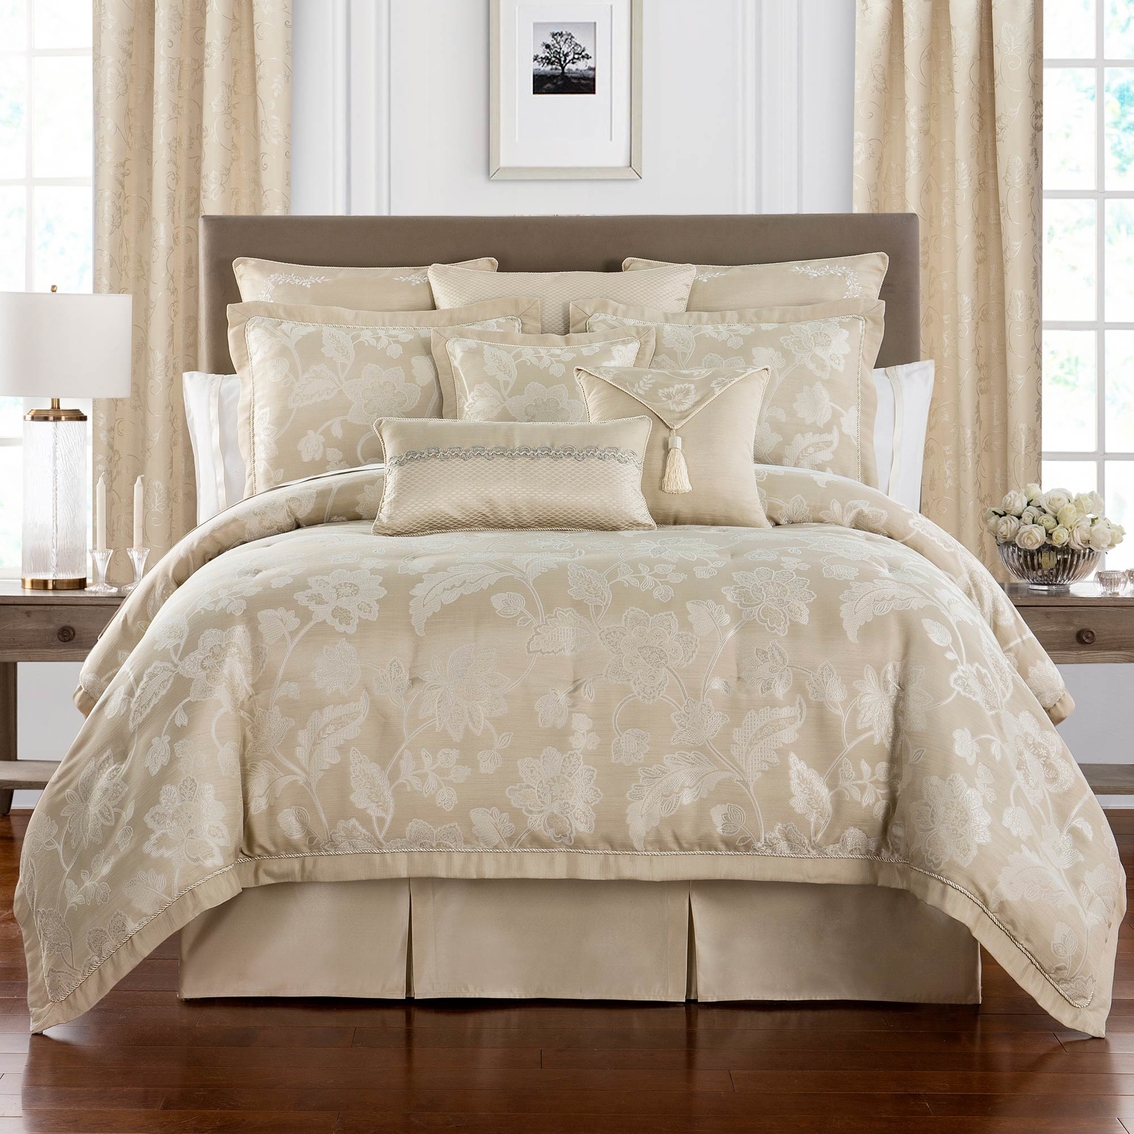 Marquis by Waterford Emilia Comforter Set - Image 2 of 3